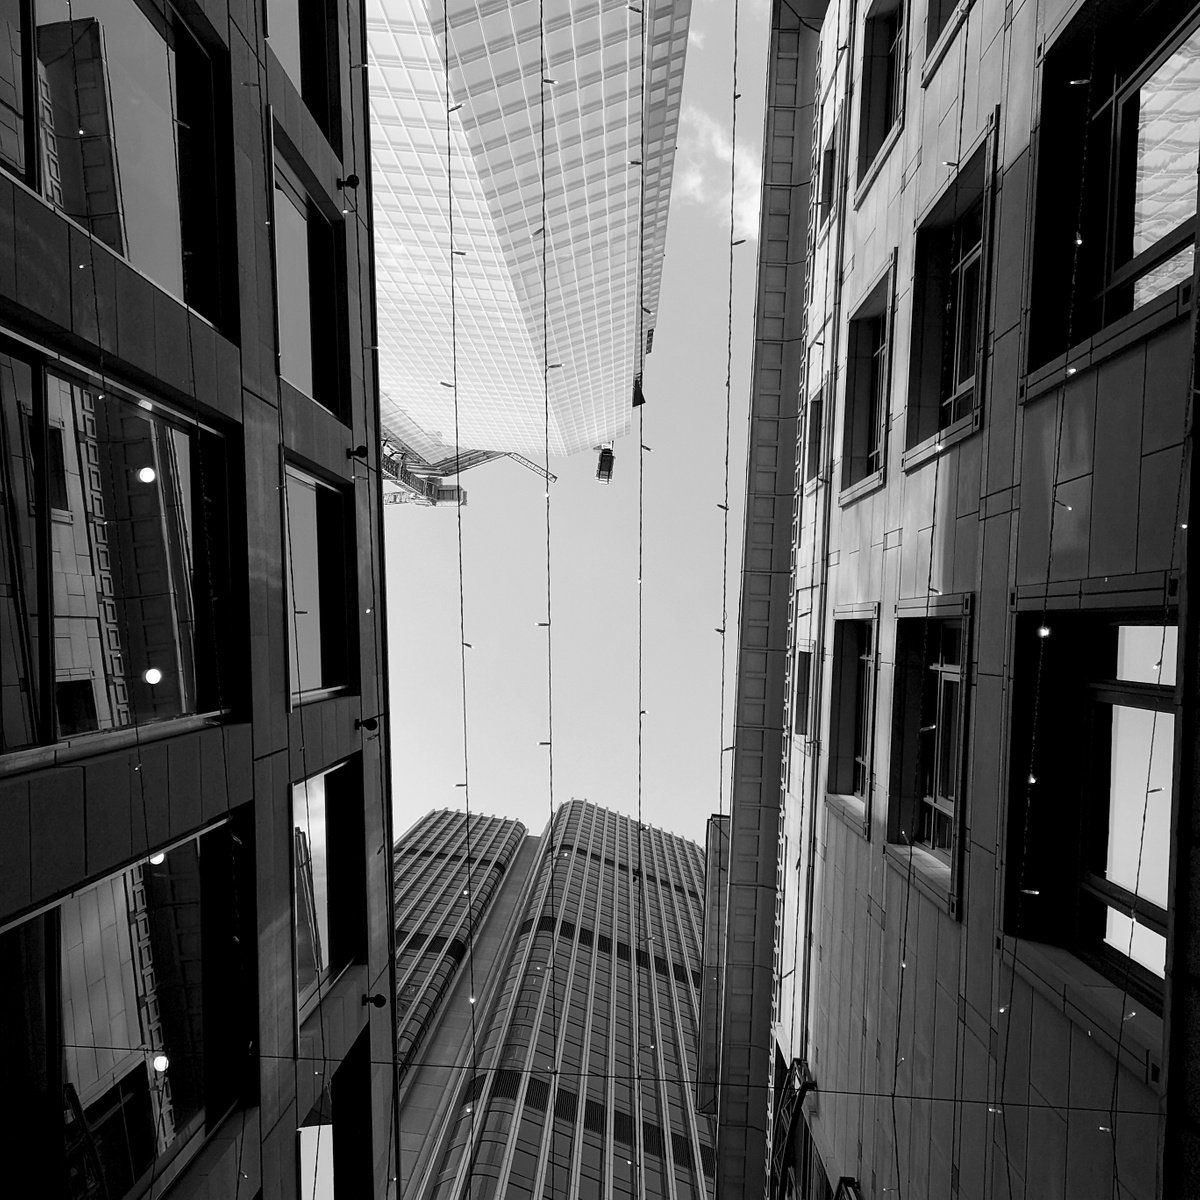 Light The Sky - London Architecture Photography Print in Black And White, 12x12 Inches, C- by Amadeus Long